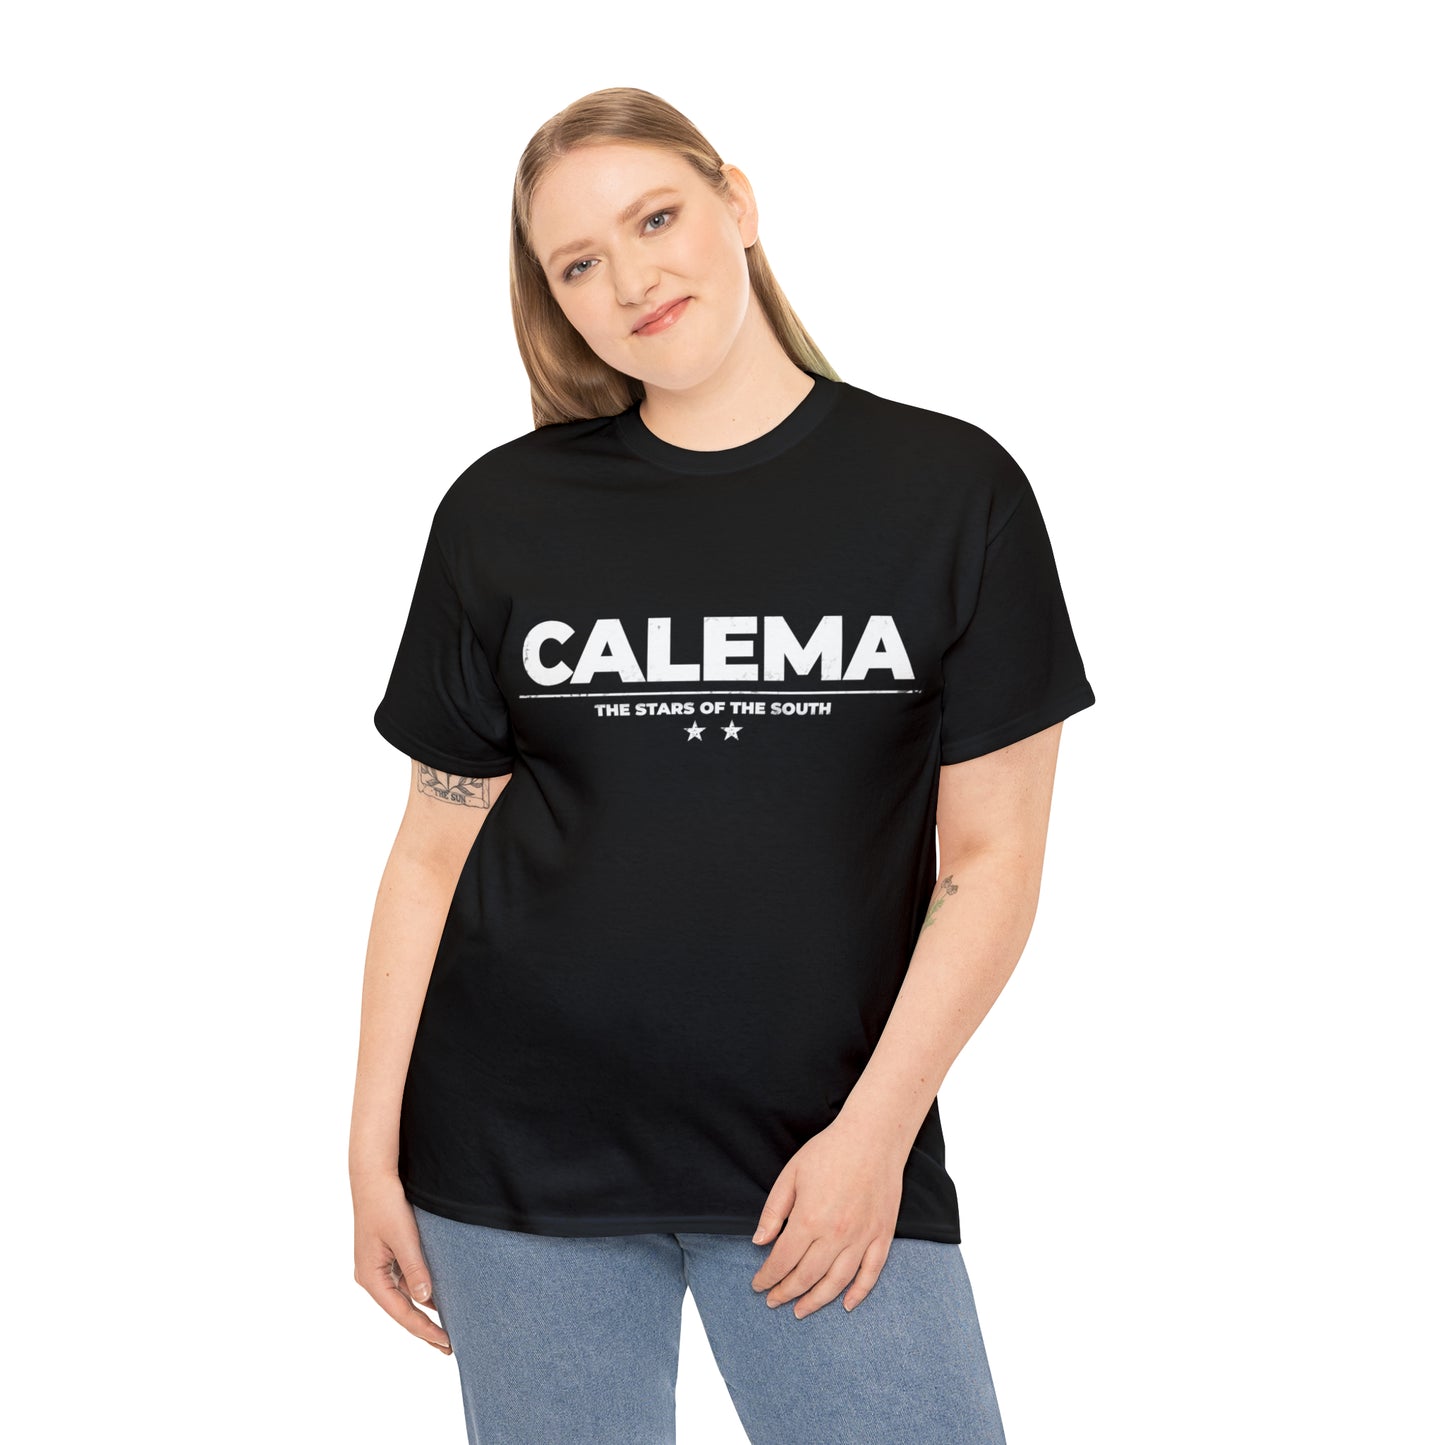 Calema - The Stars of the South